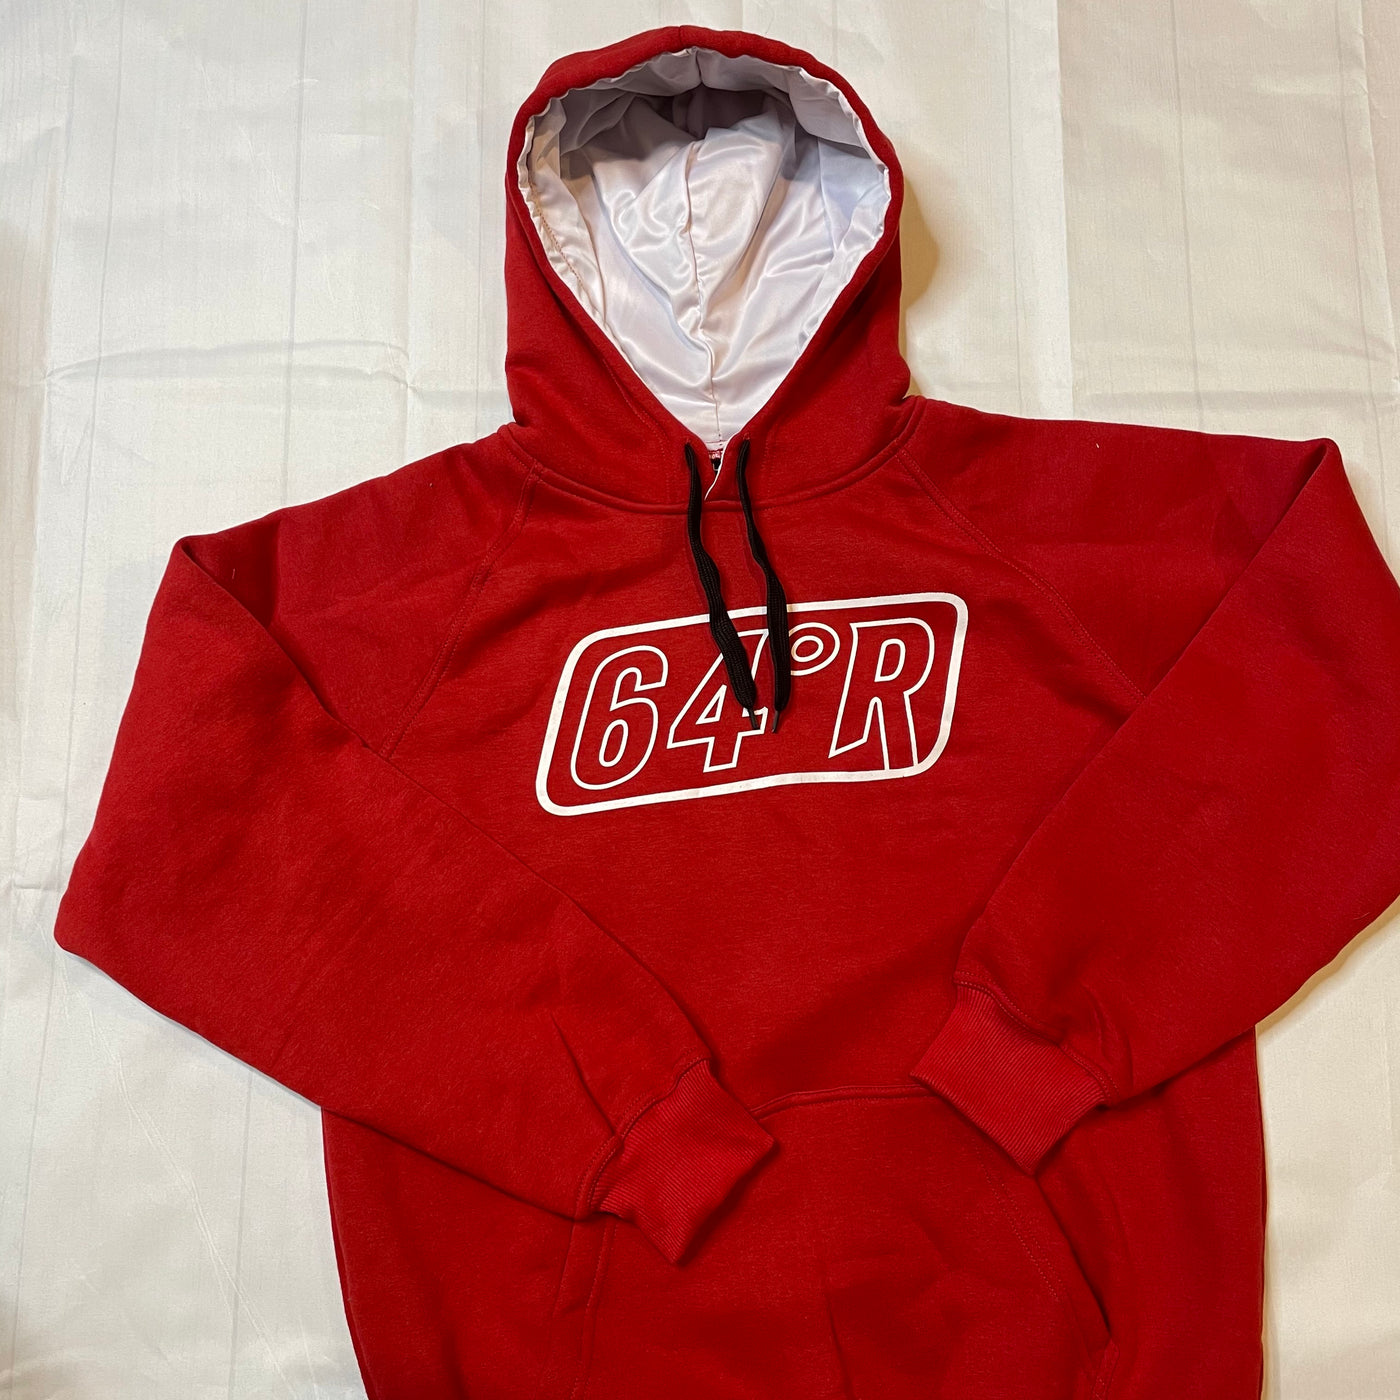 Red hoodie with white logo